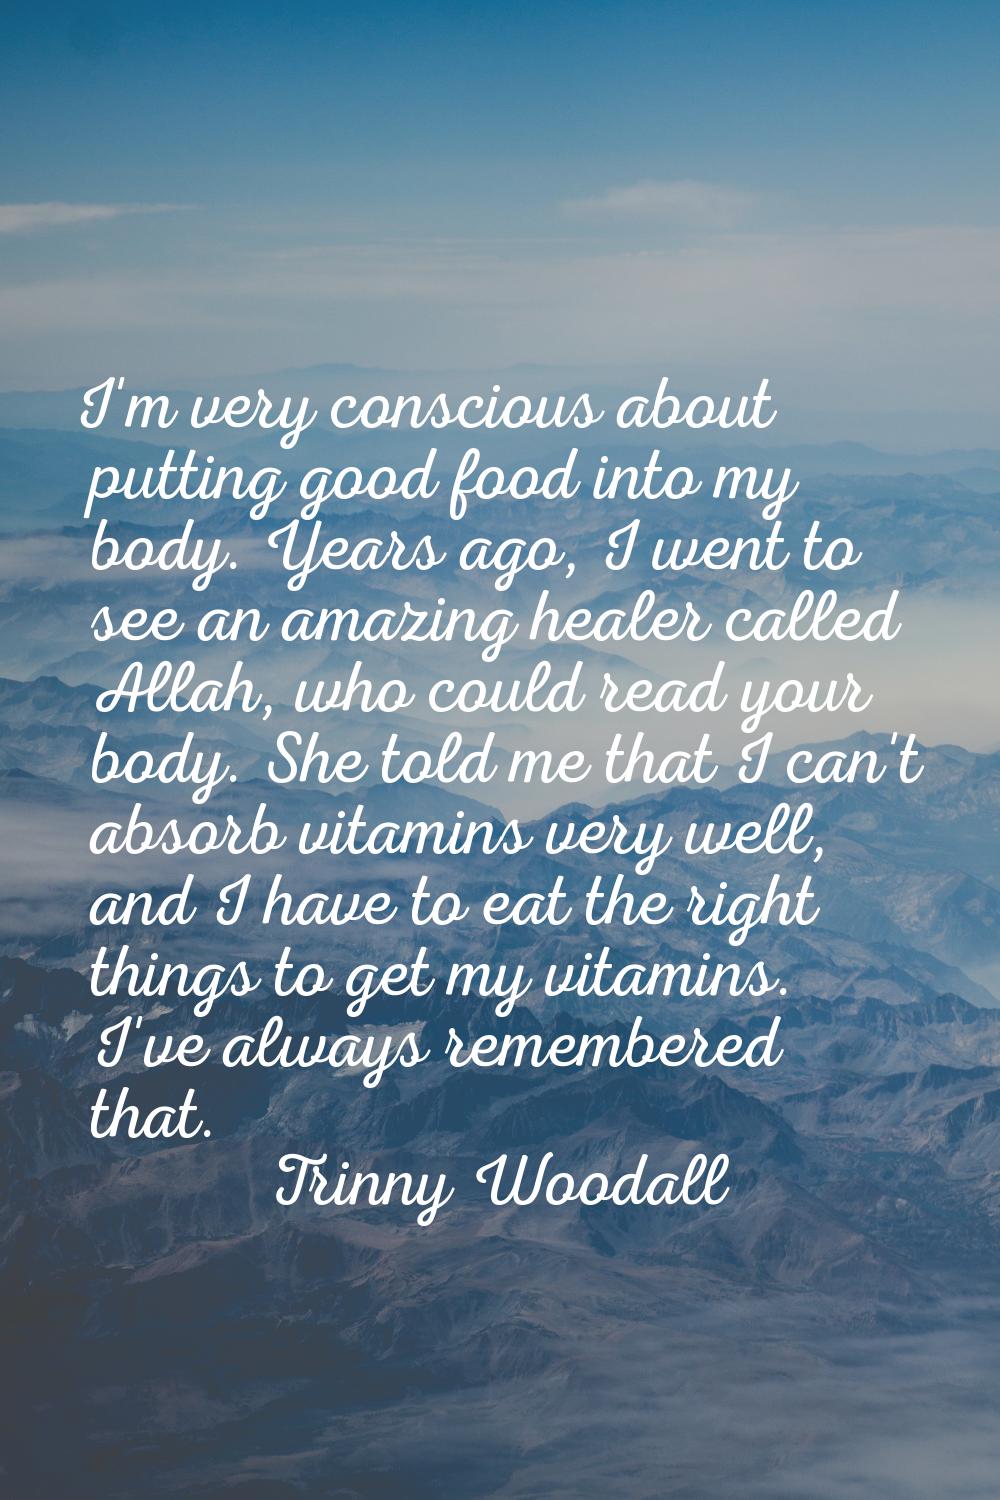 I'm very conscious about putting good food into my body. Years ago, I went to see an amazing healer